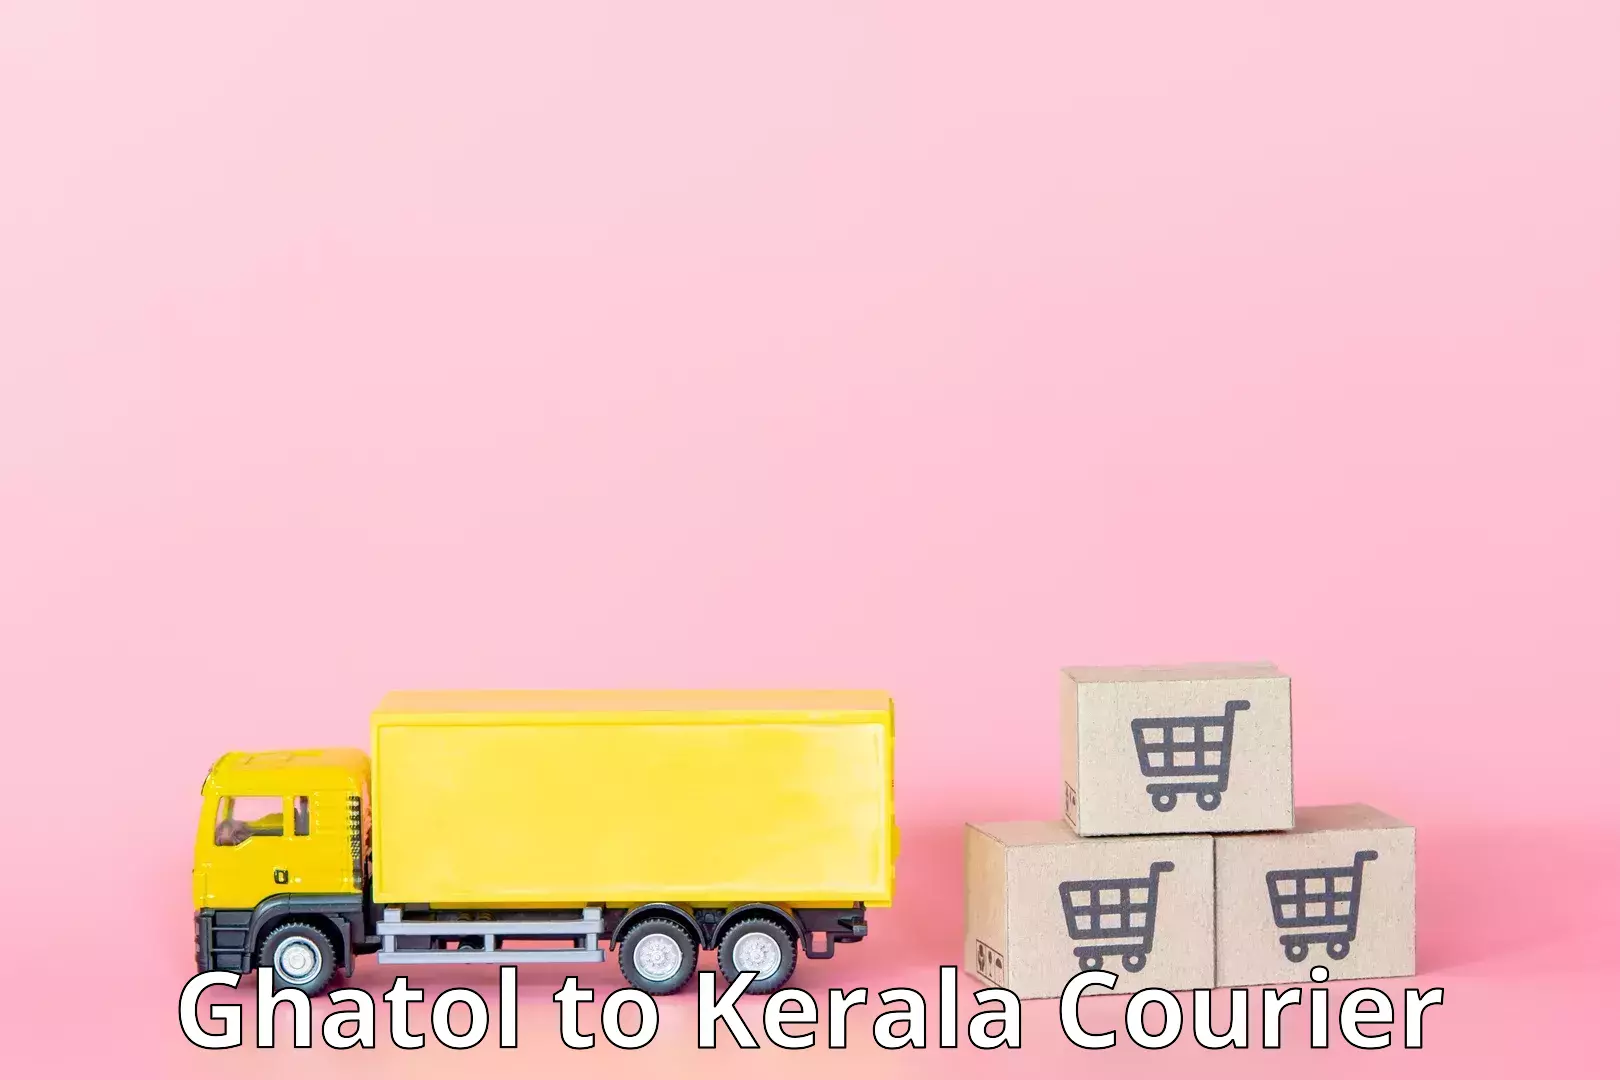 Cargo delivery service Ghatol to Kerala